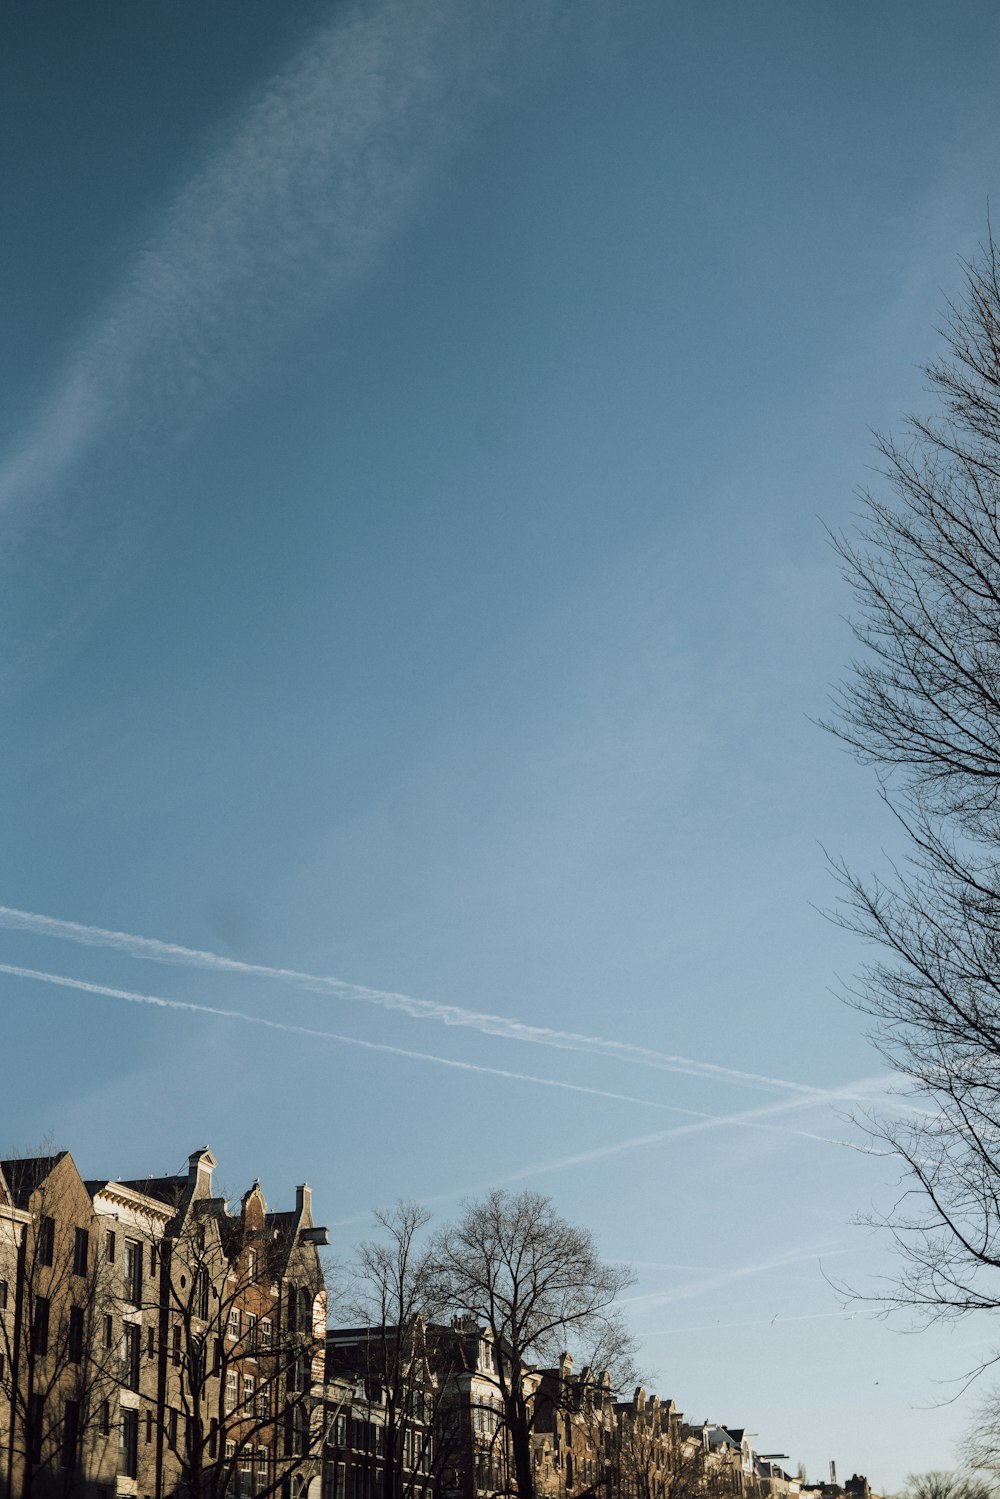 a clear blue sky with some contrails in the sky